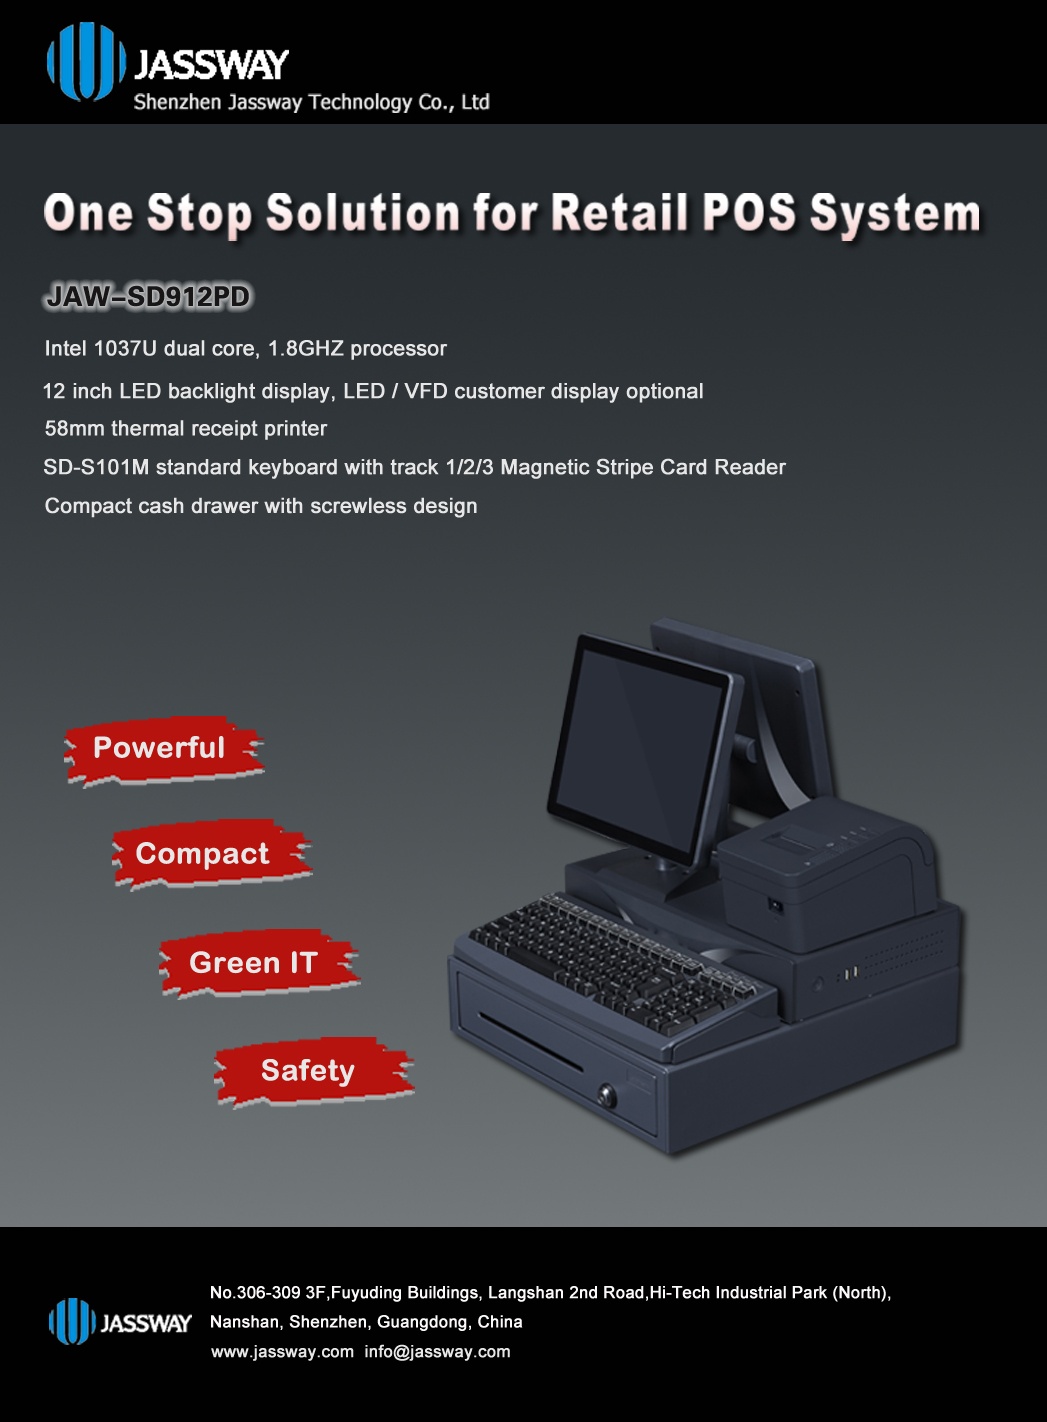 One stop solution for retails